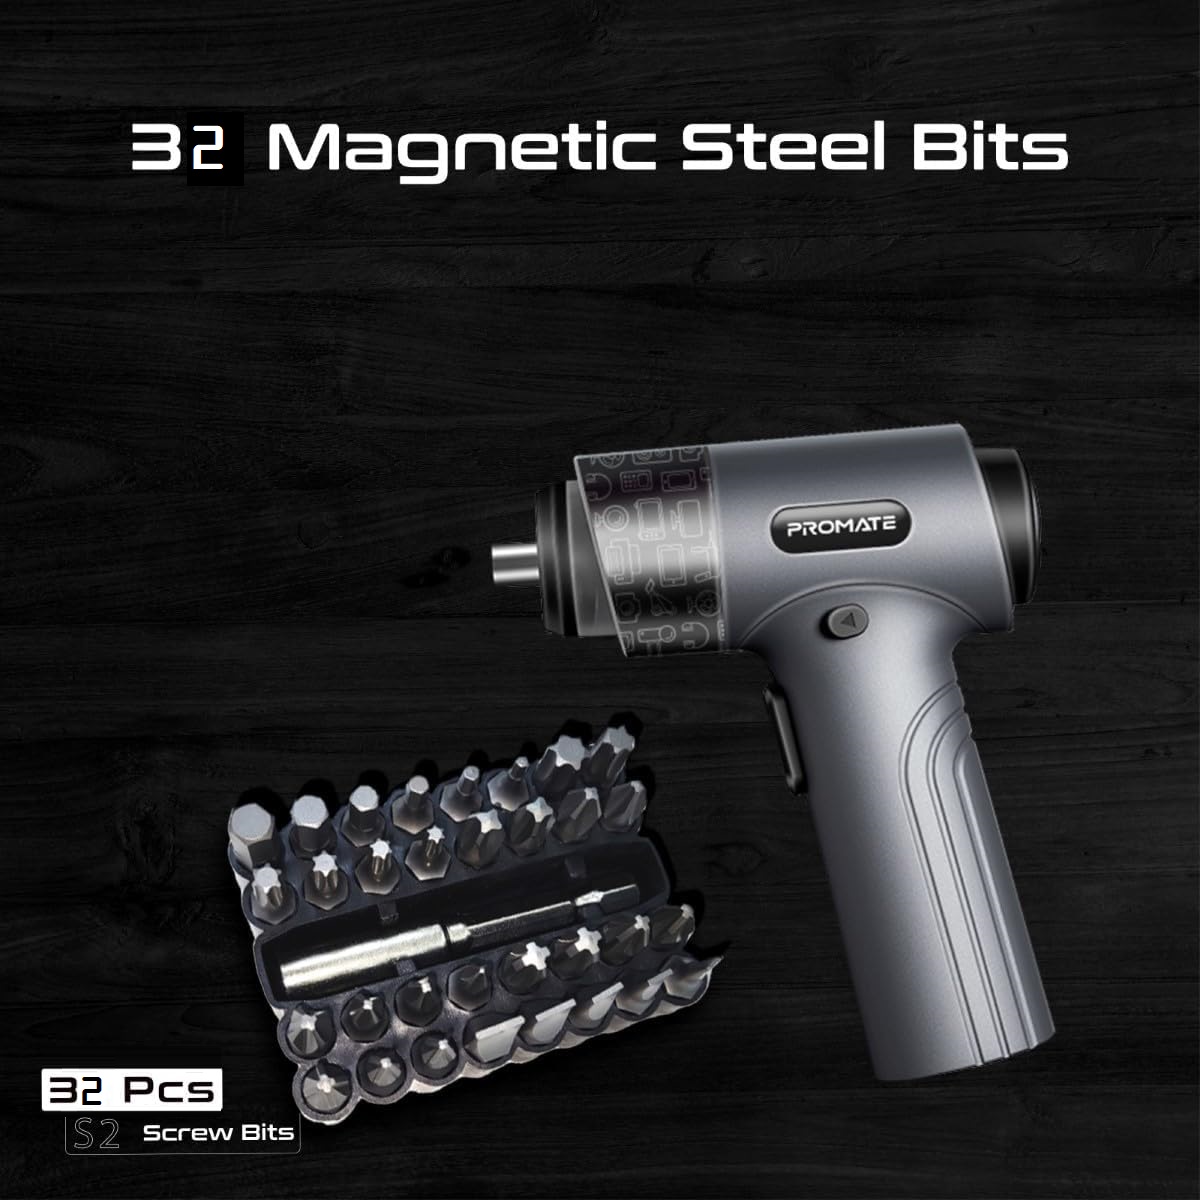 32 Magnetic S2 Bits: This cordless electric screwdriver comes with 32 Magnetic high-quality S2 Steel Bits with a double anti-corrosion layer that makes it durable against wear